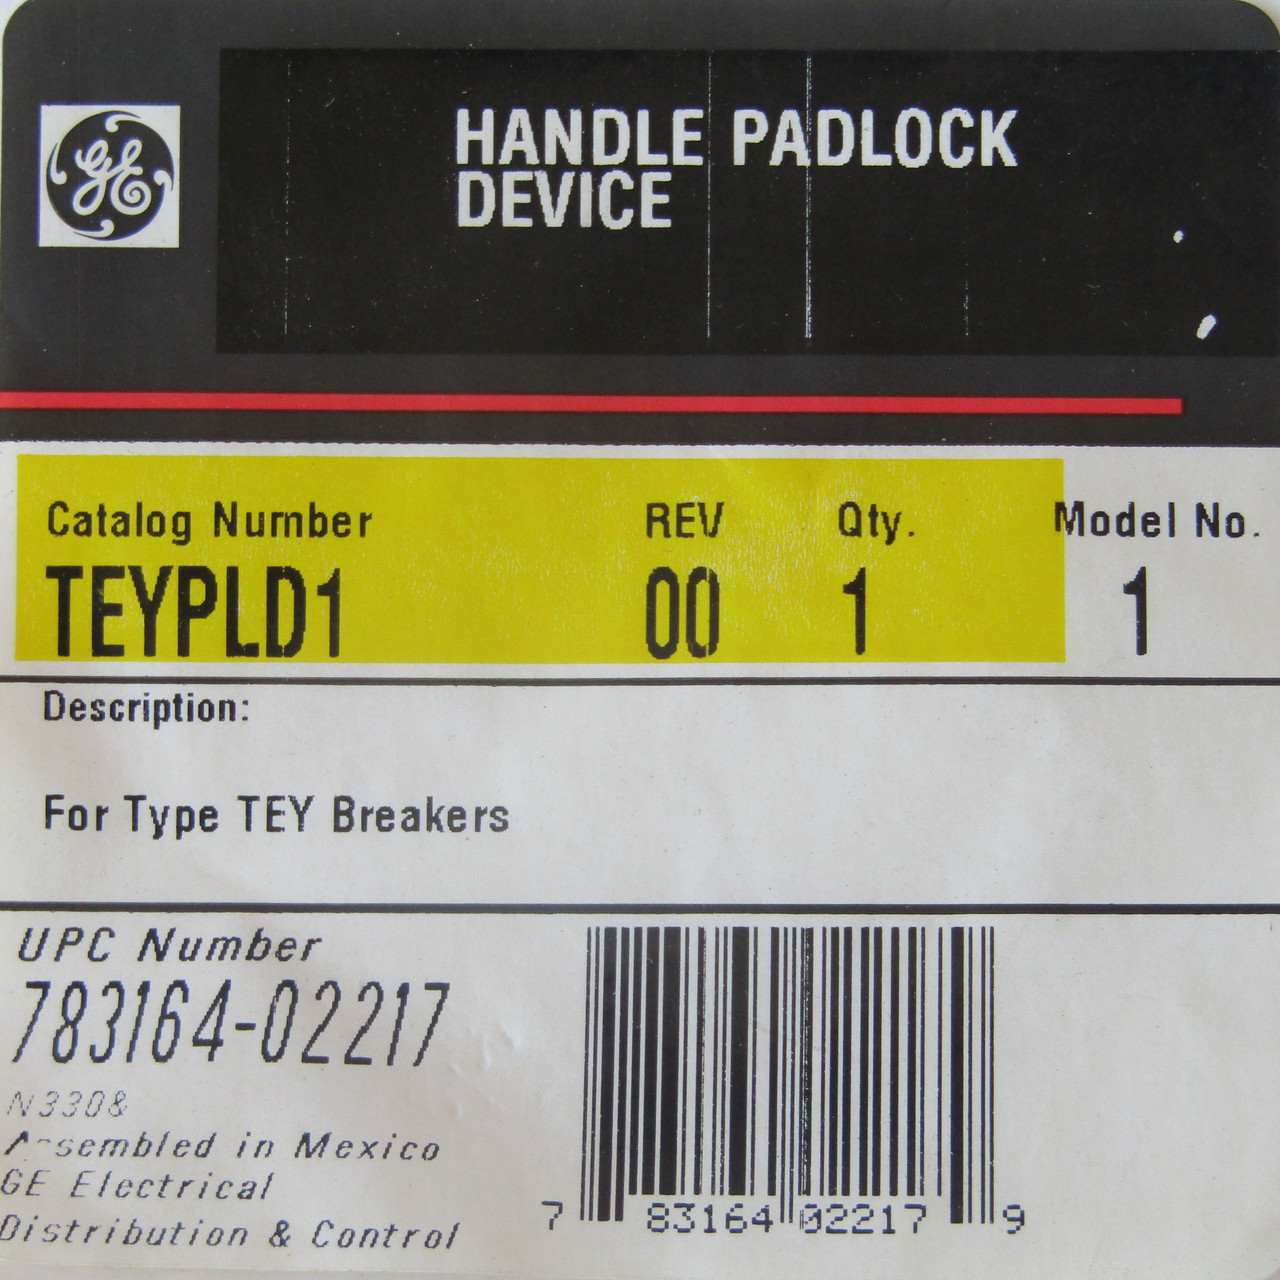 General Electric TEYPLD1 Handle Padlock Device Model No. 1 - New